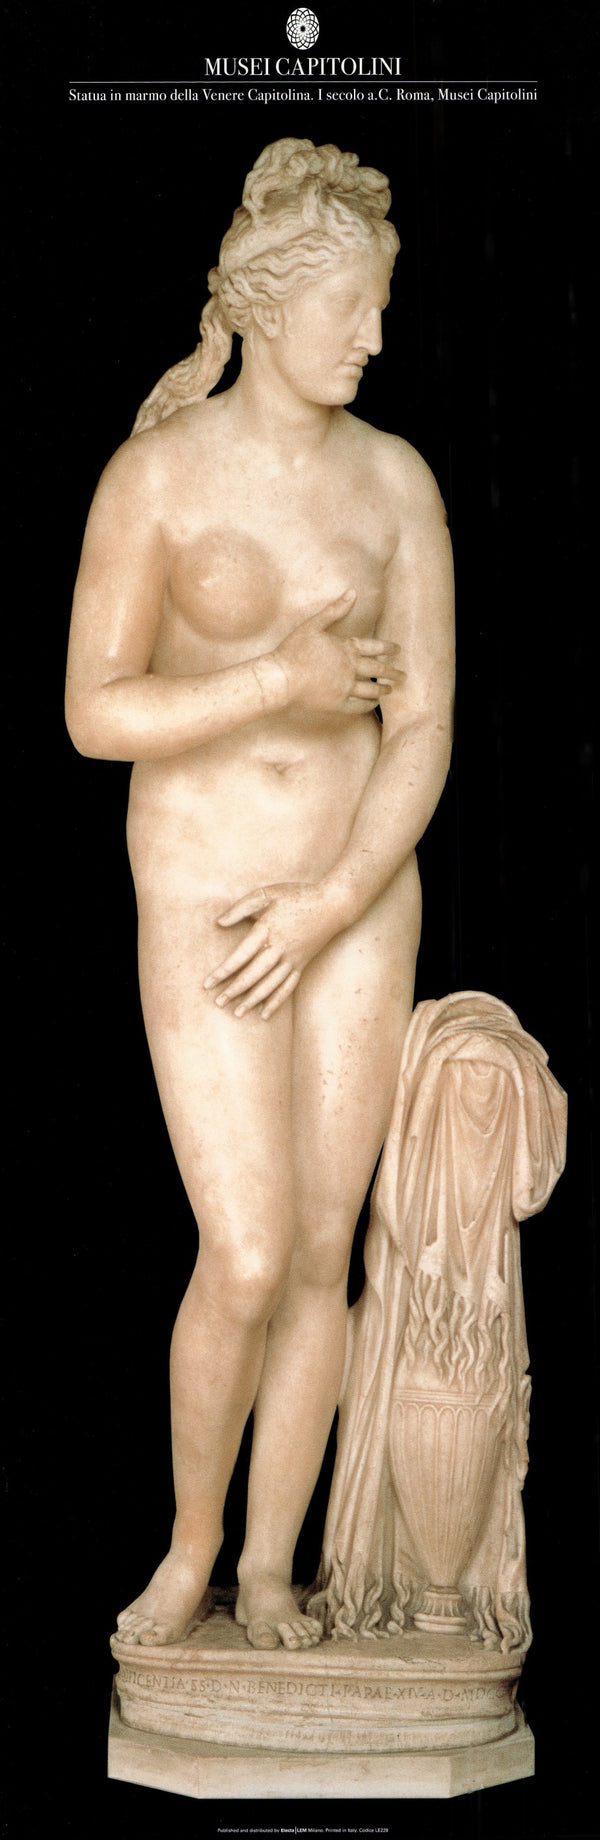 Marble statue of the Capitoline Venus by Musei Capitolini - 14 X 40 Inches (Art print)